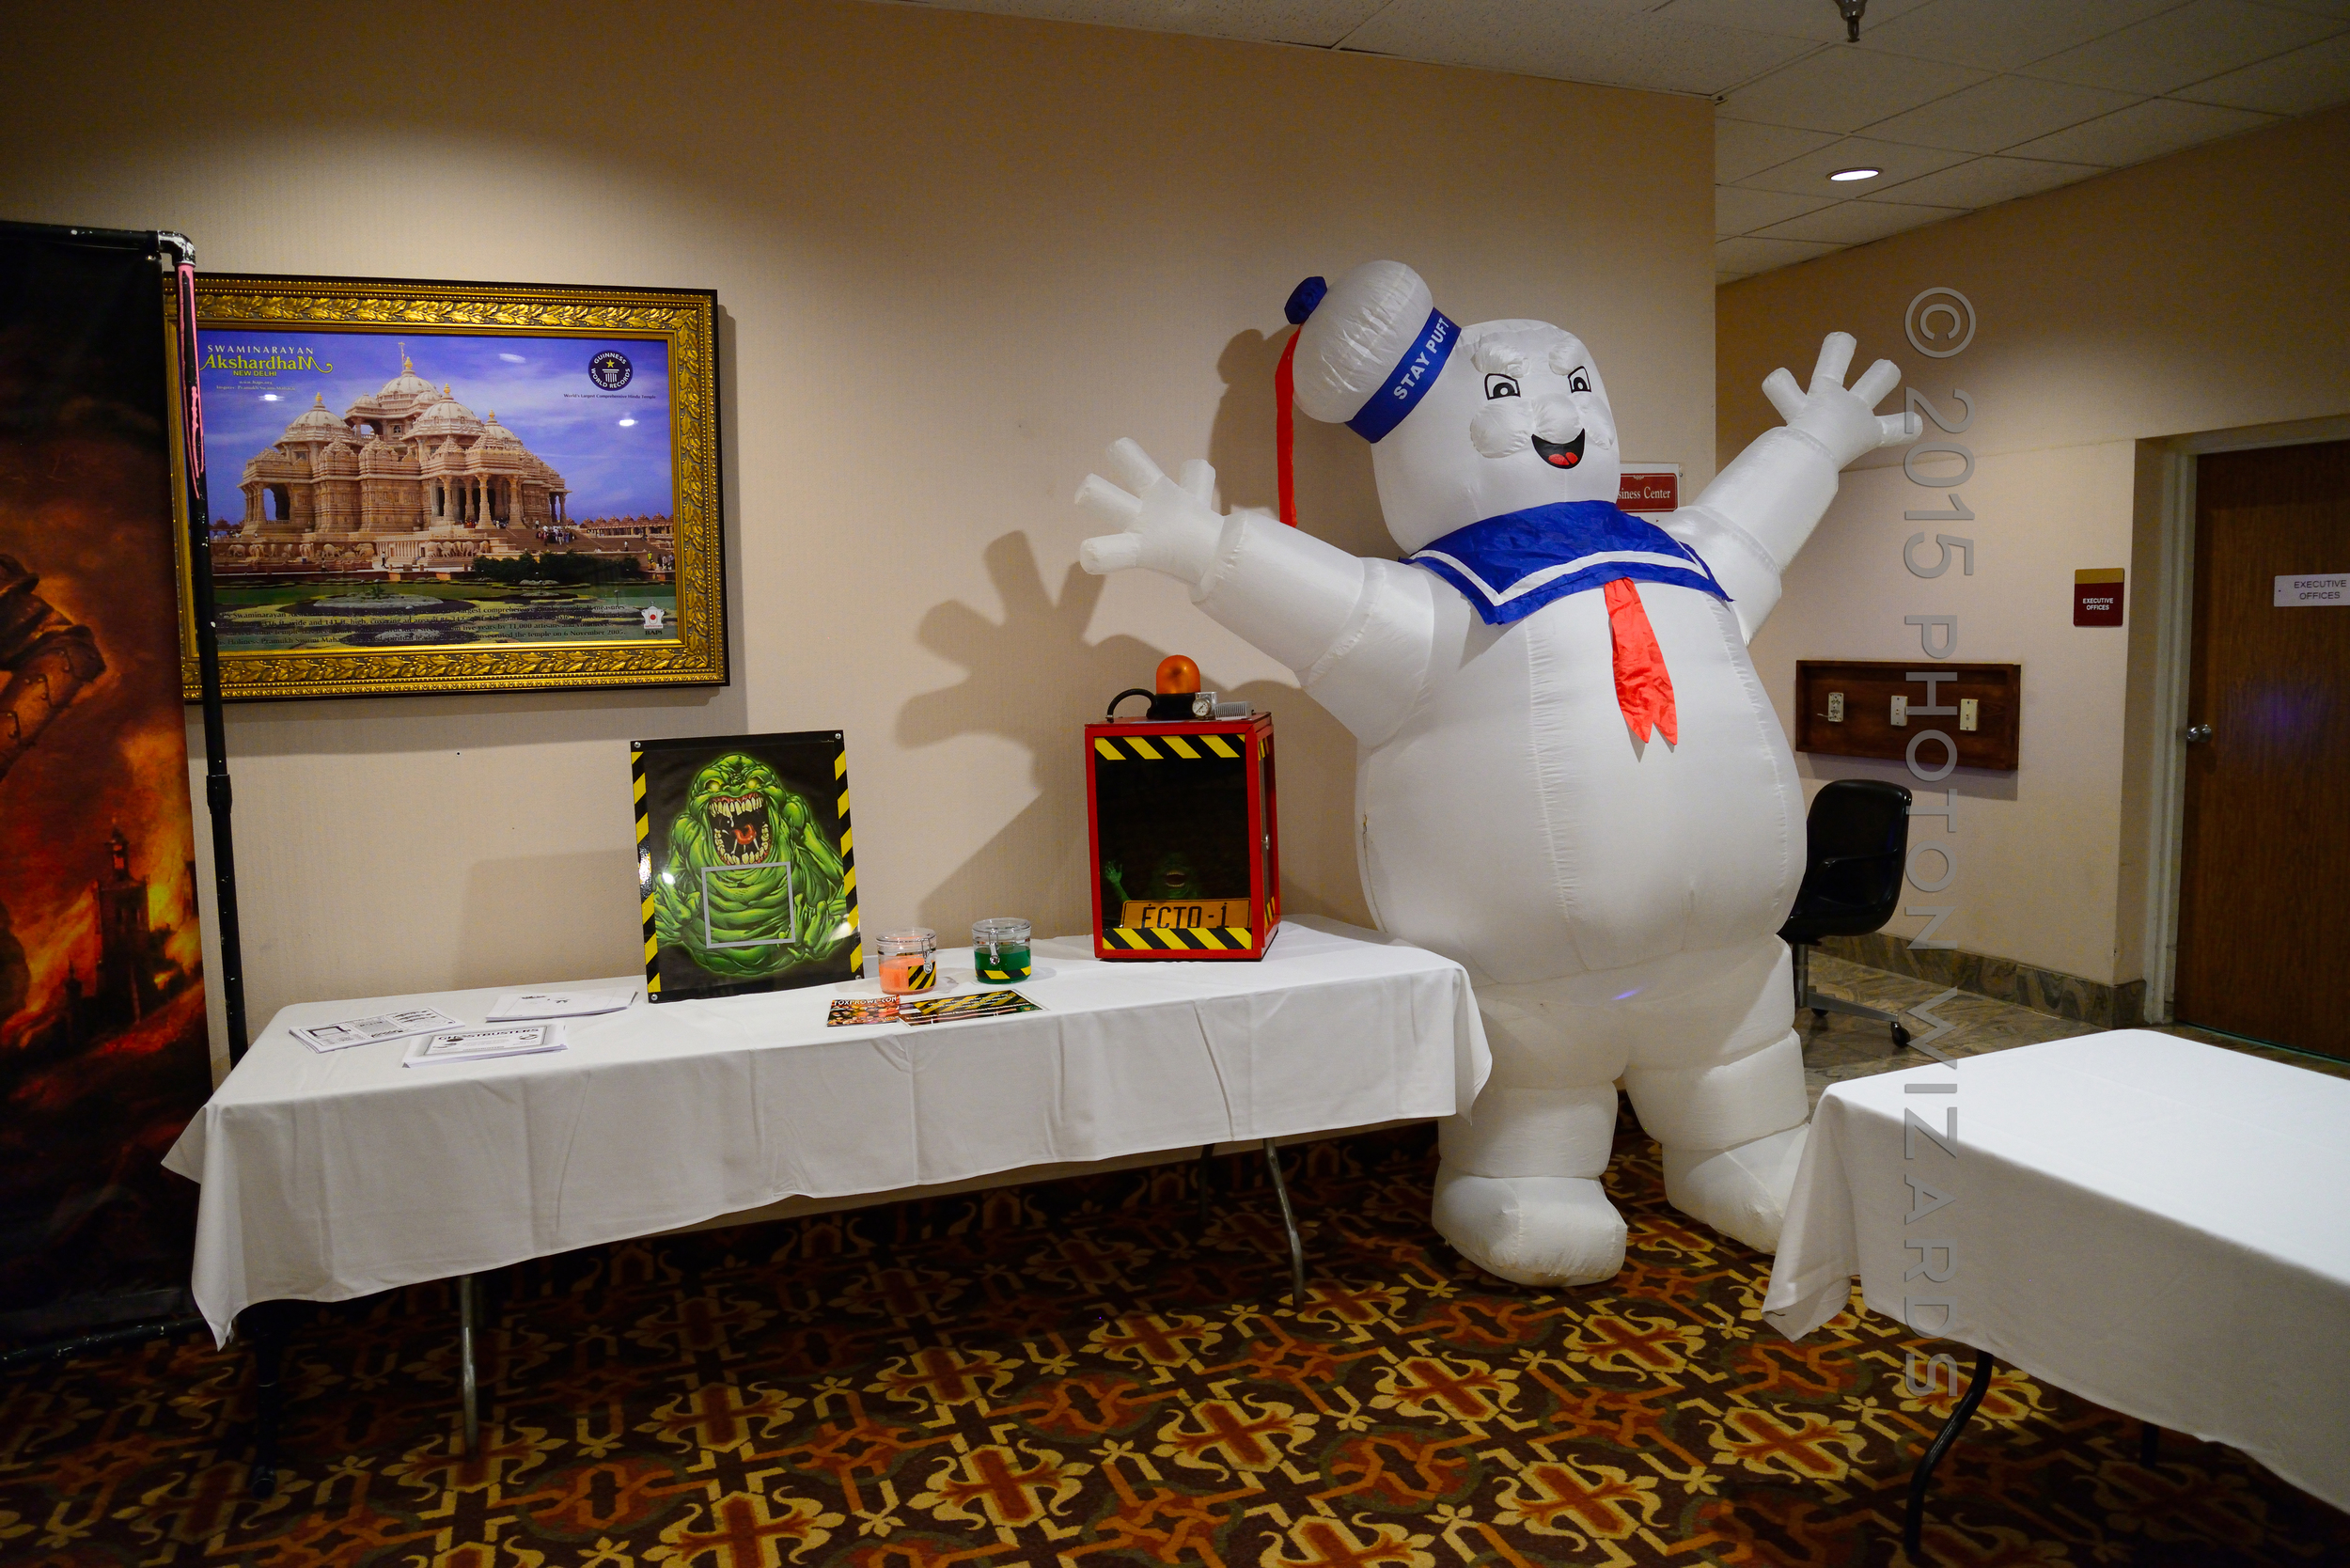 The Stay Puft Marshmallow Man (not to scale)